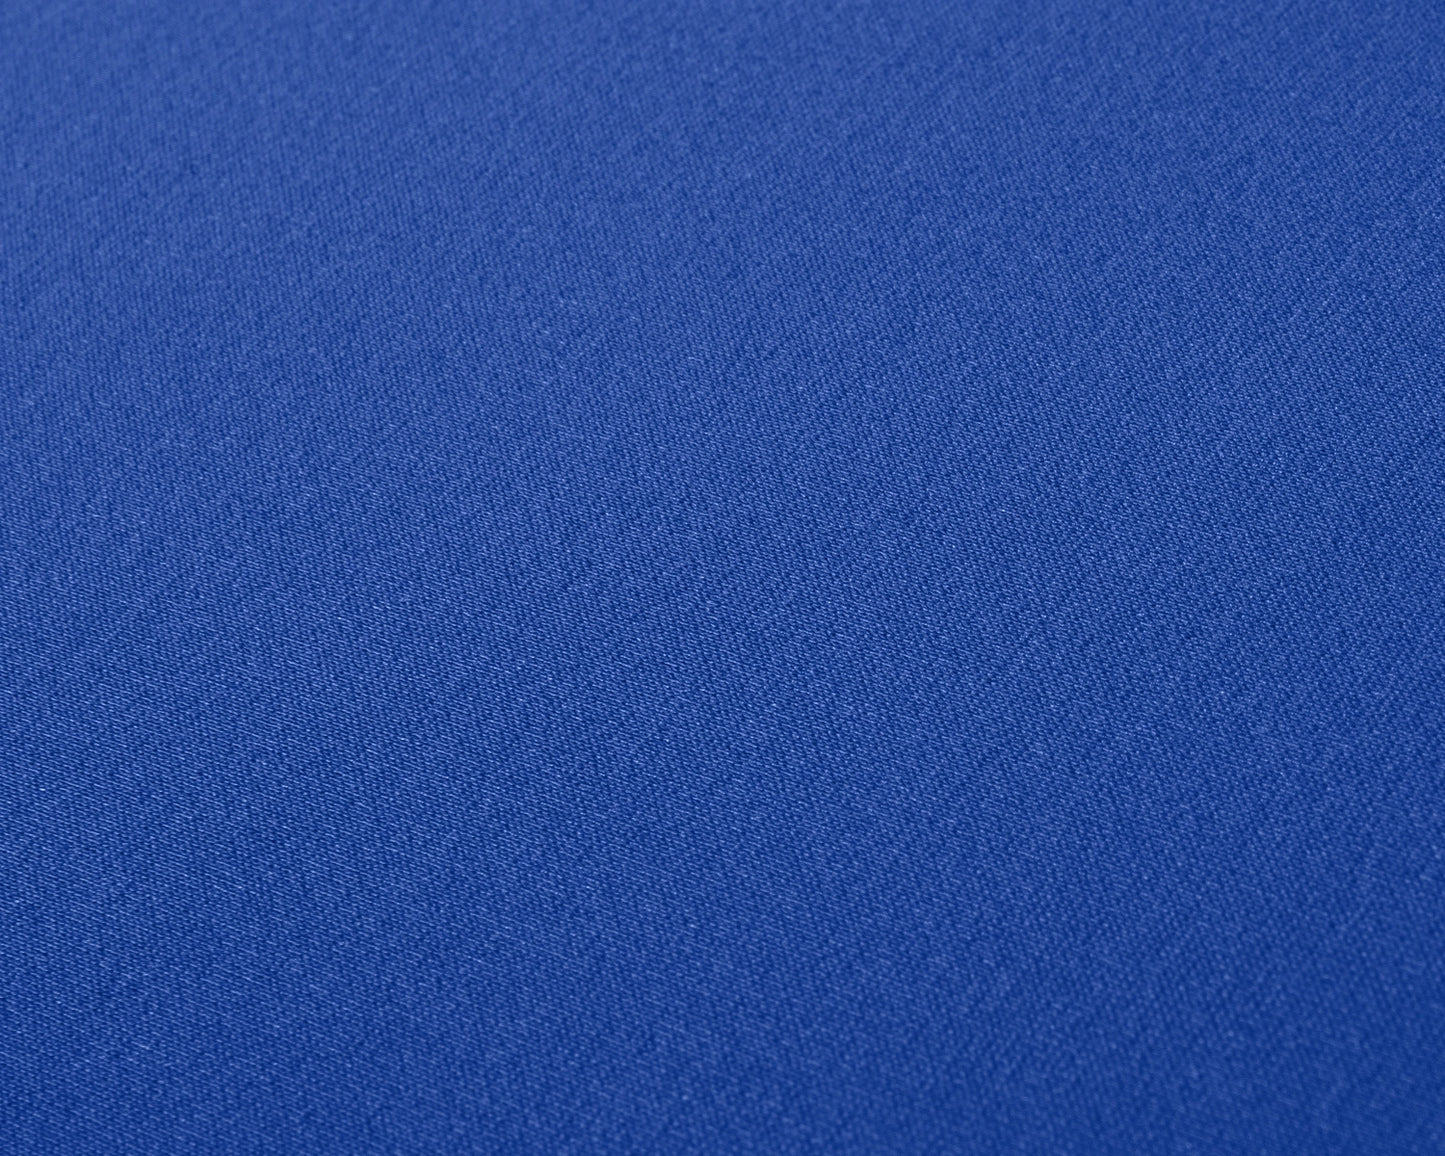 Detail image of soft stretchy fabric.